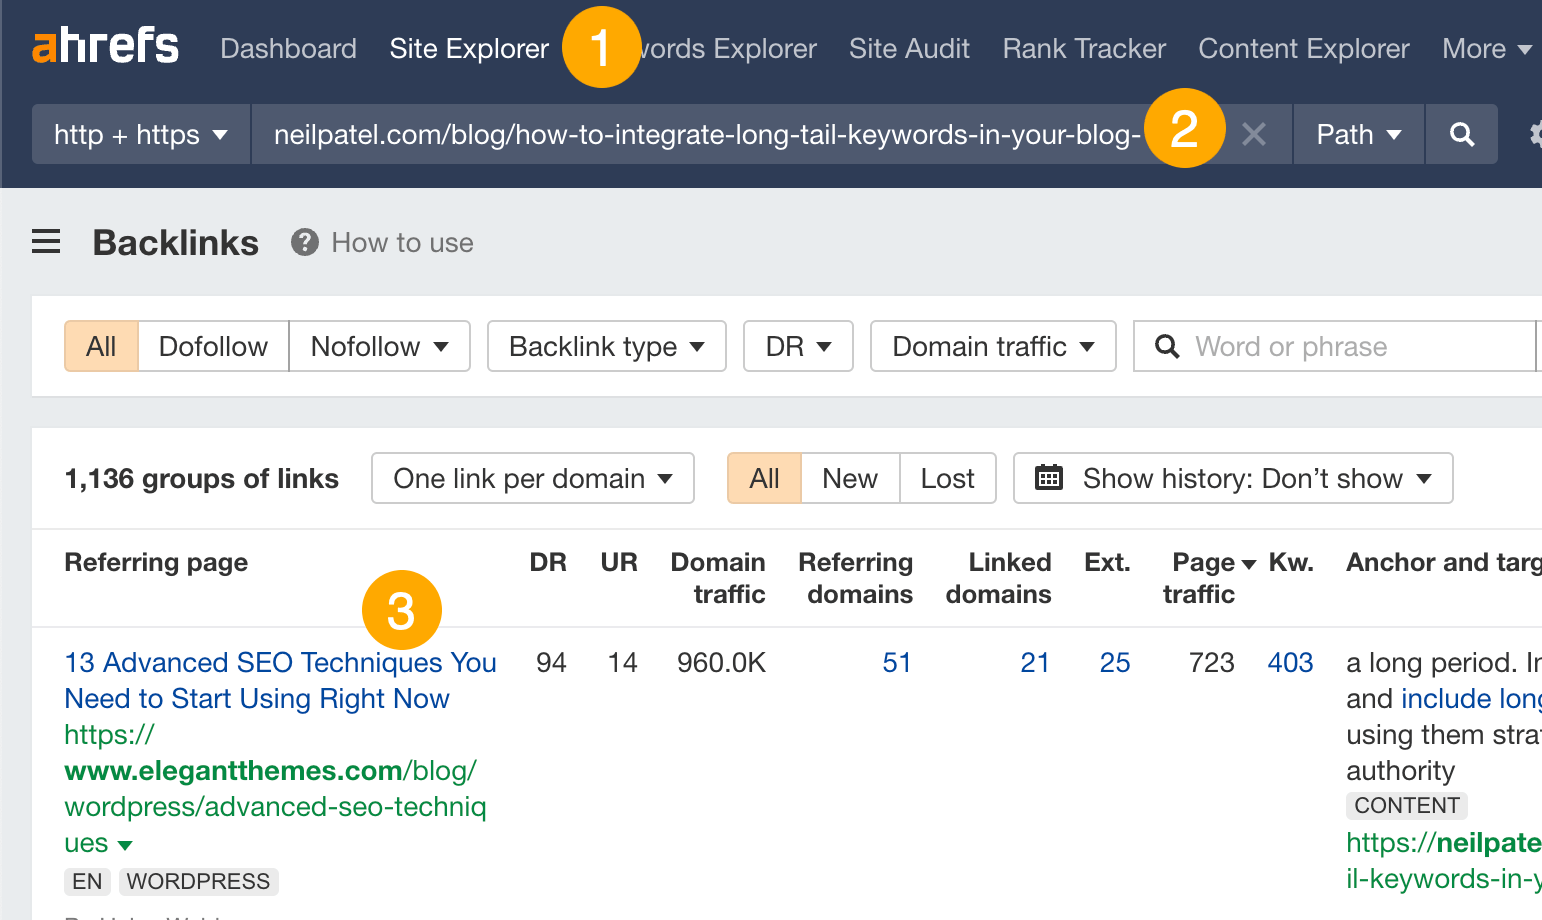 Finding backlinks to the page in Ahrefs' Site Explorer